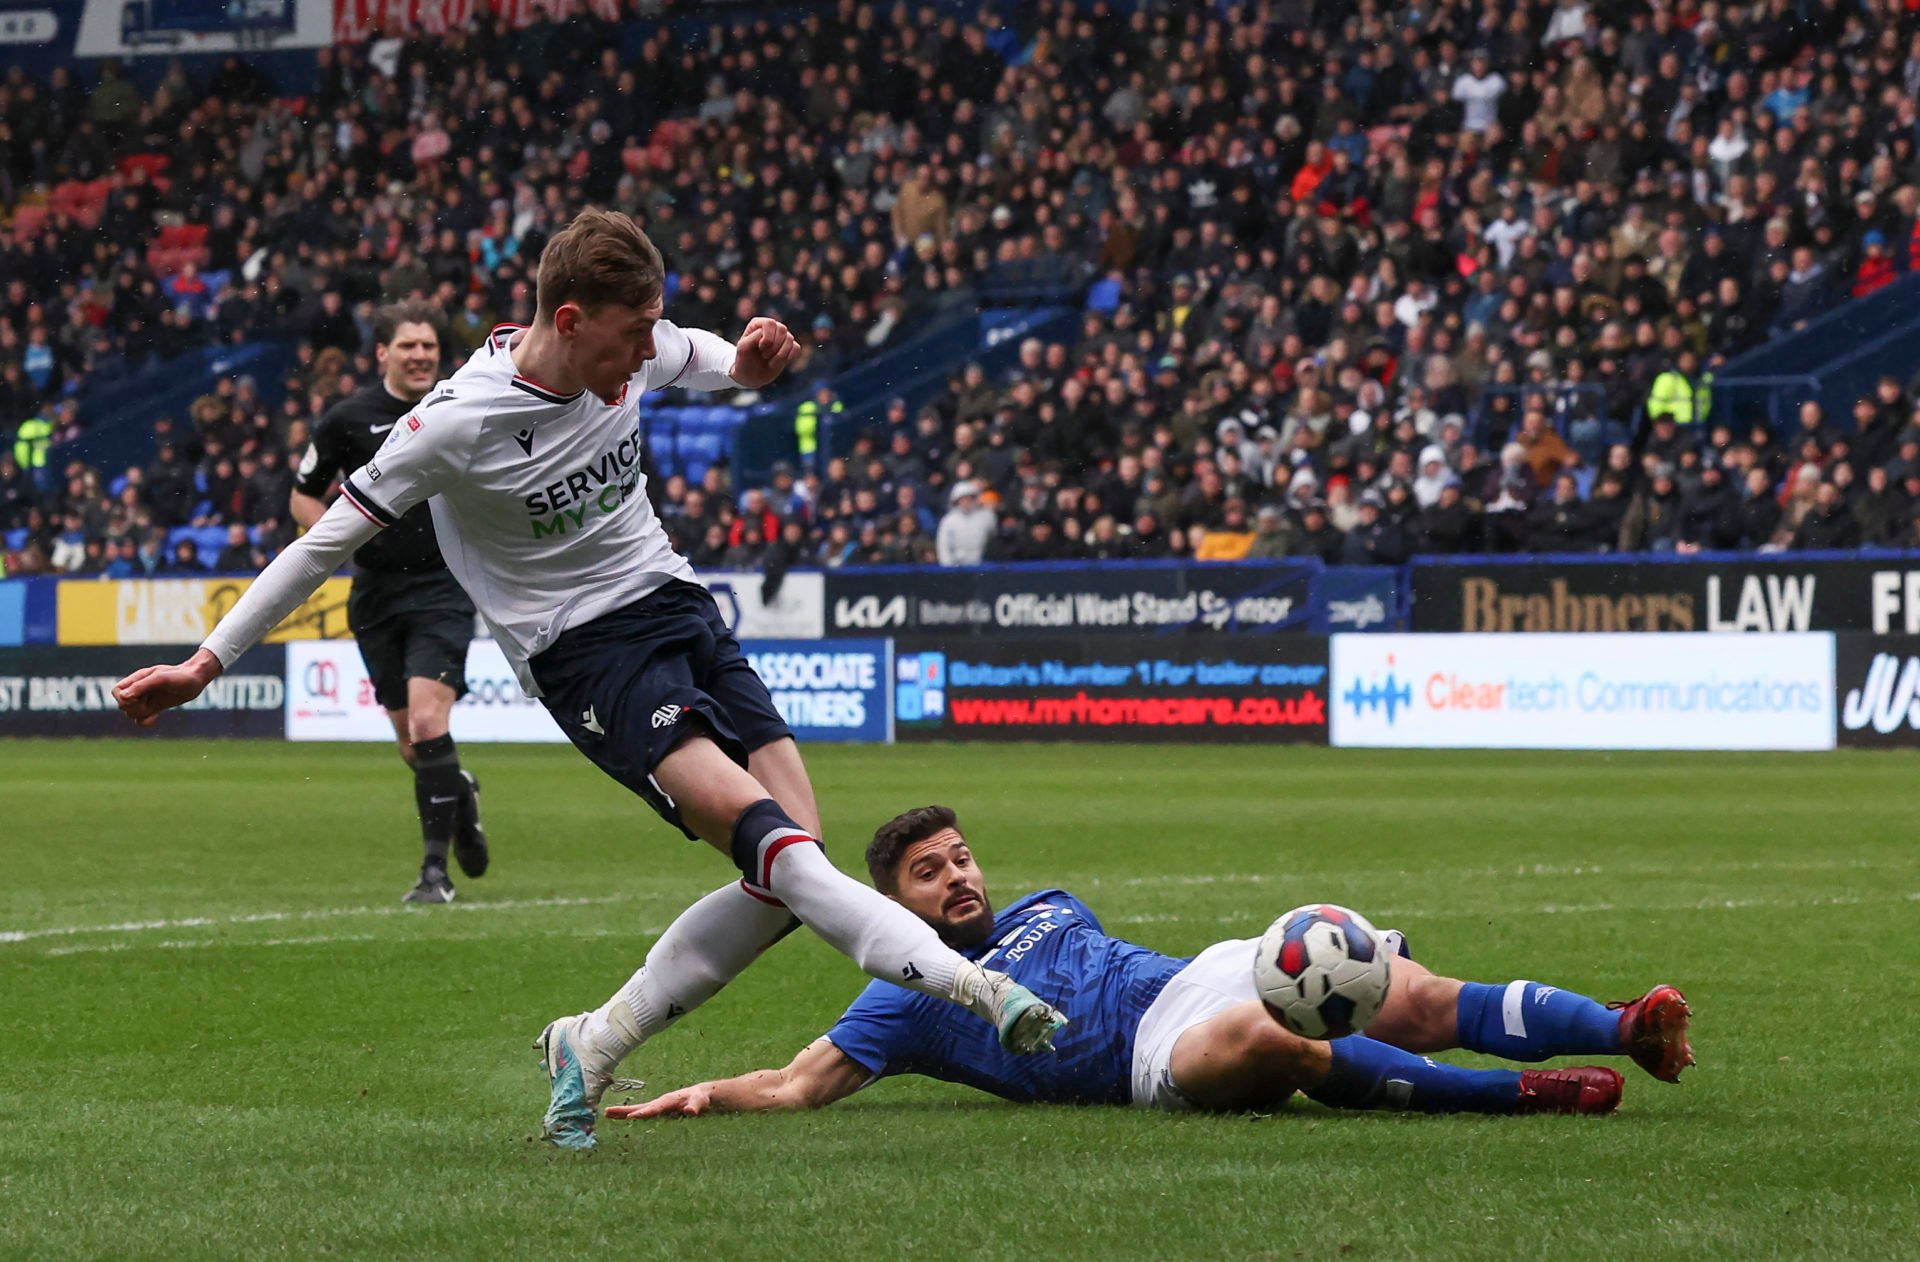 Bolton Wanderers - Ipswich Town - Sky Bet League One